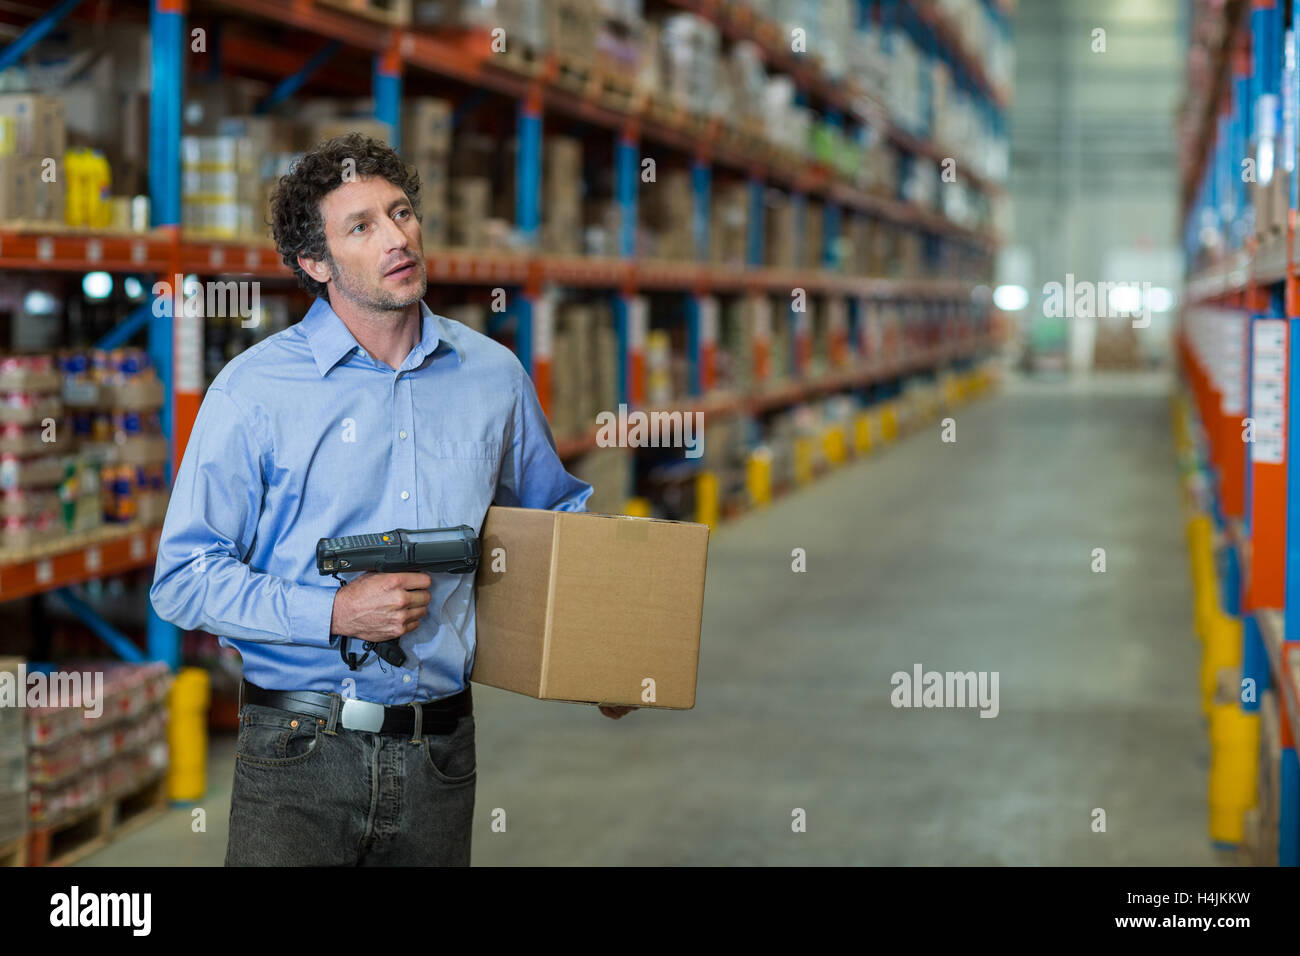 Warehouse worker holding cardboard box and barcode scanner machine Stock Photo